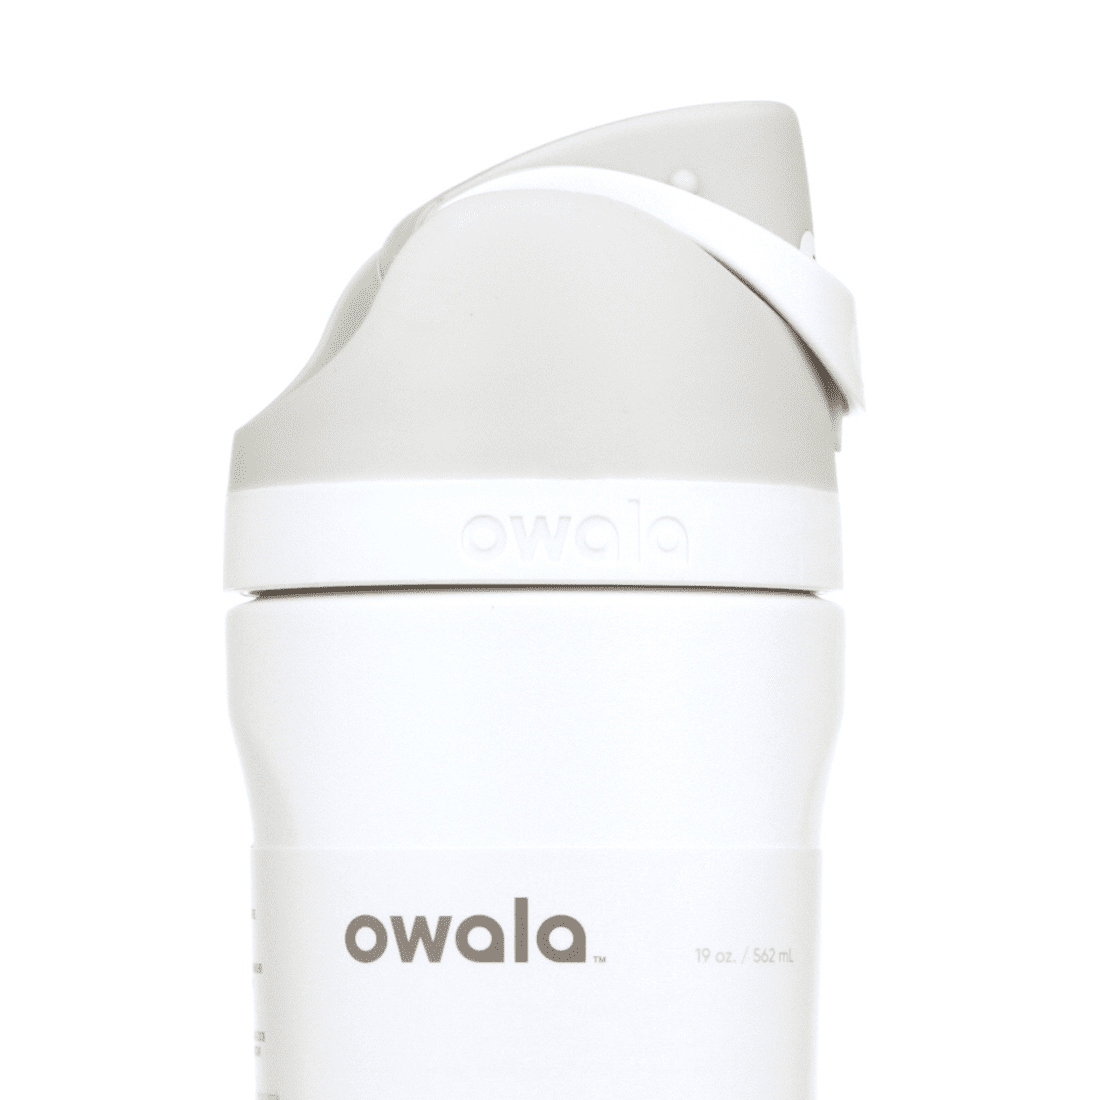 Owala Free Sip Water Bottle - Lilac, 32 oz - Fry's Food Stores